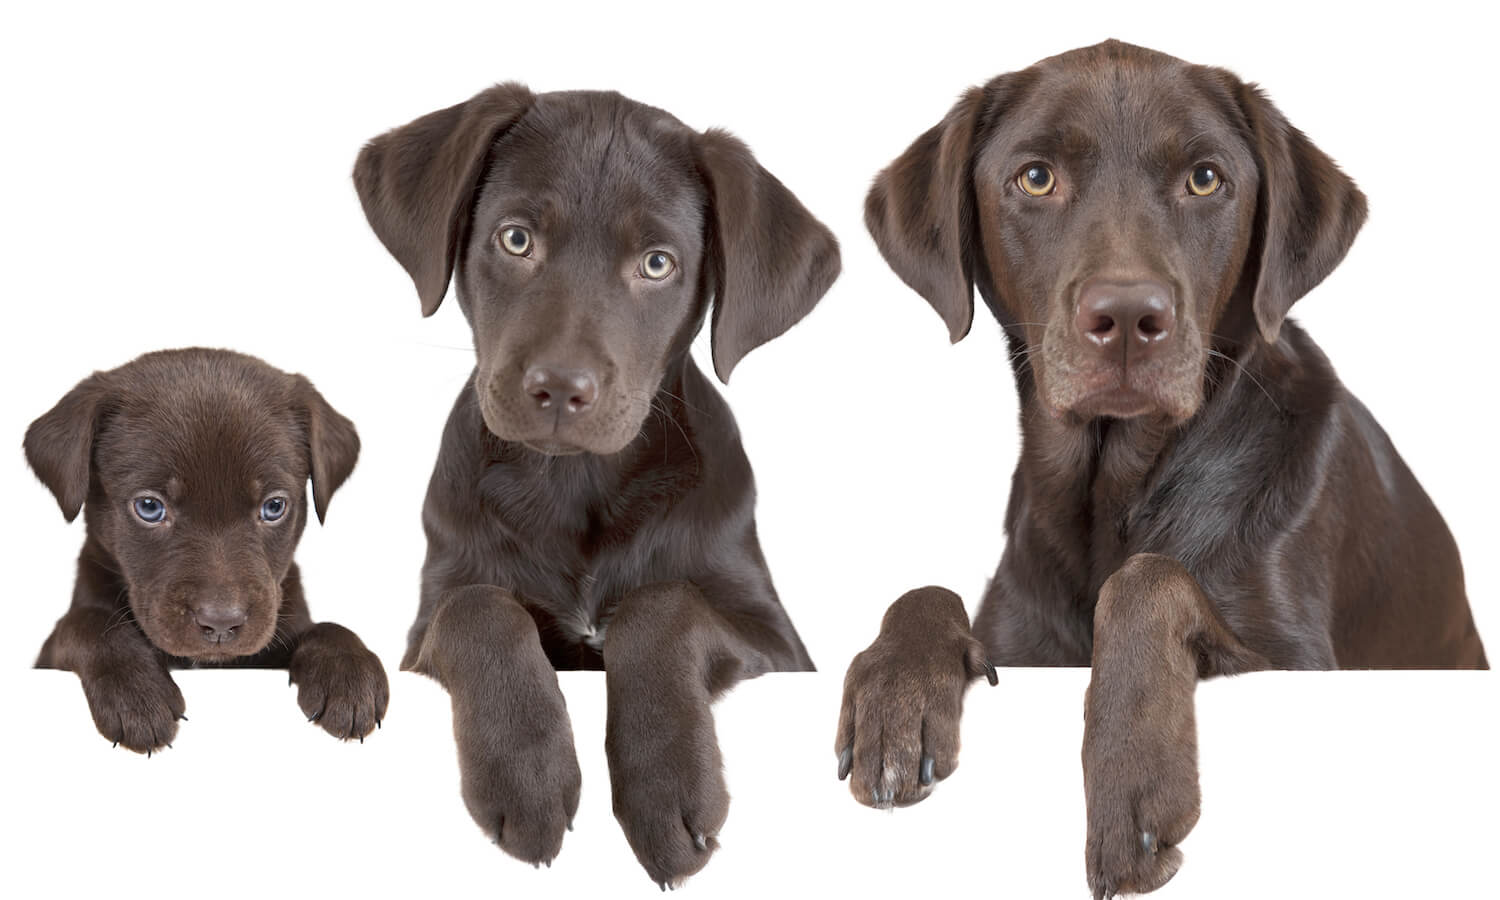 Dog's life growing stages (from puppy to adulthood) - Chocolate labrador retrievers